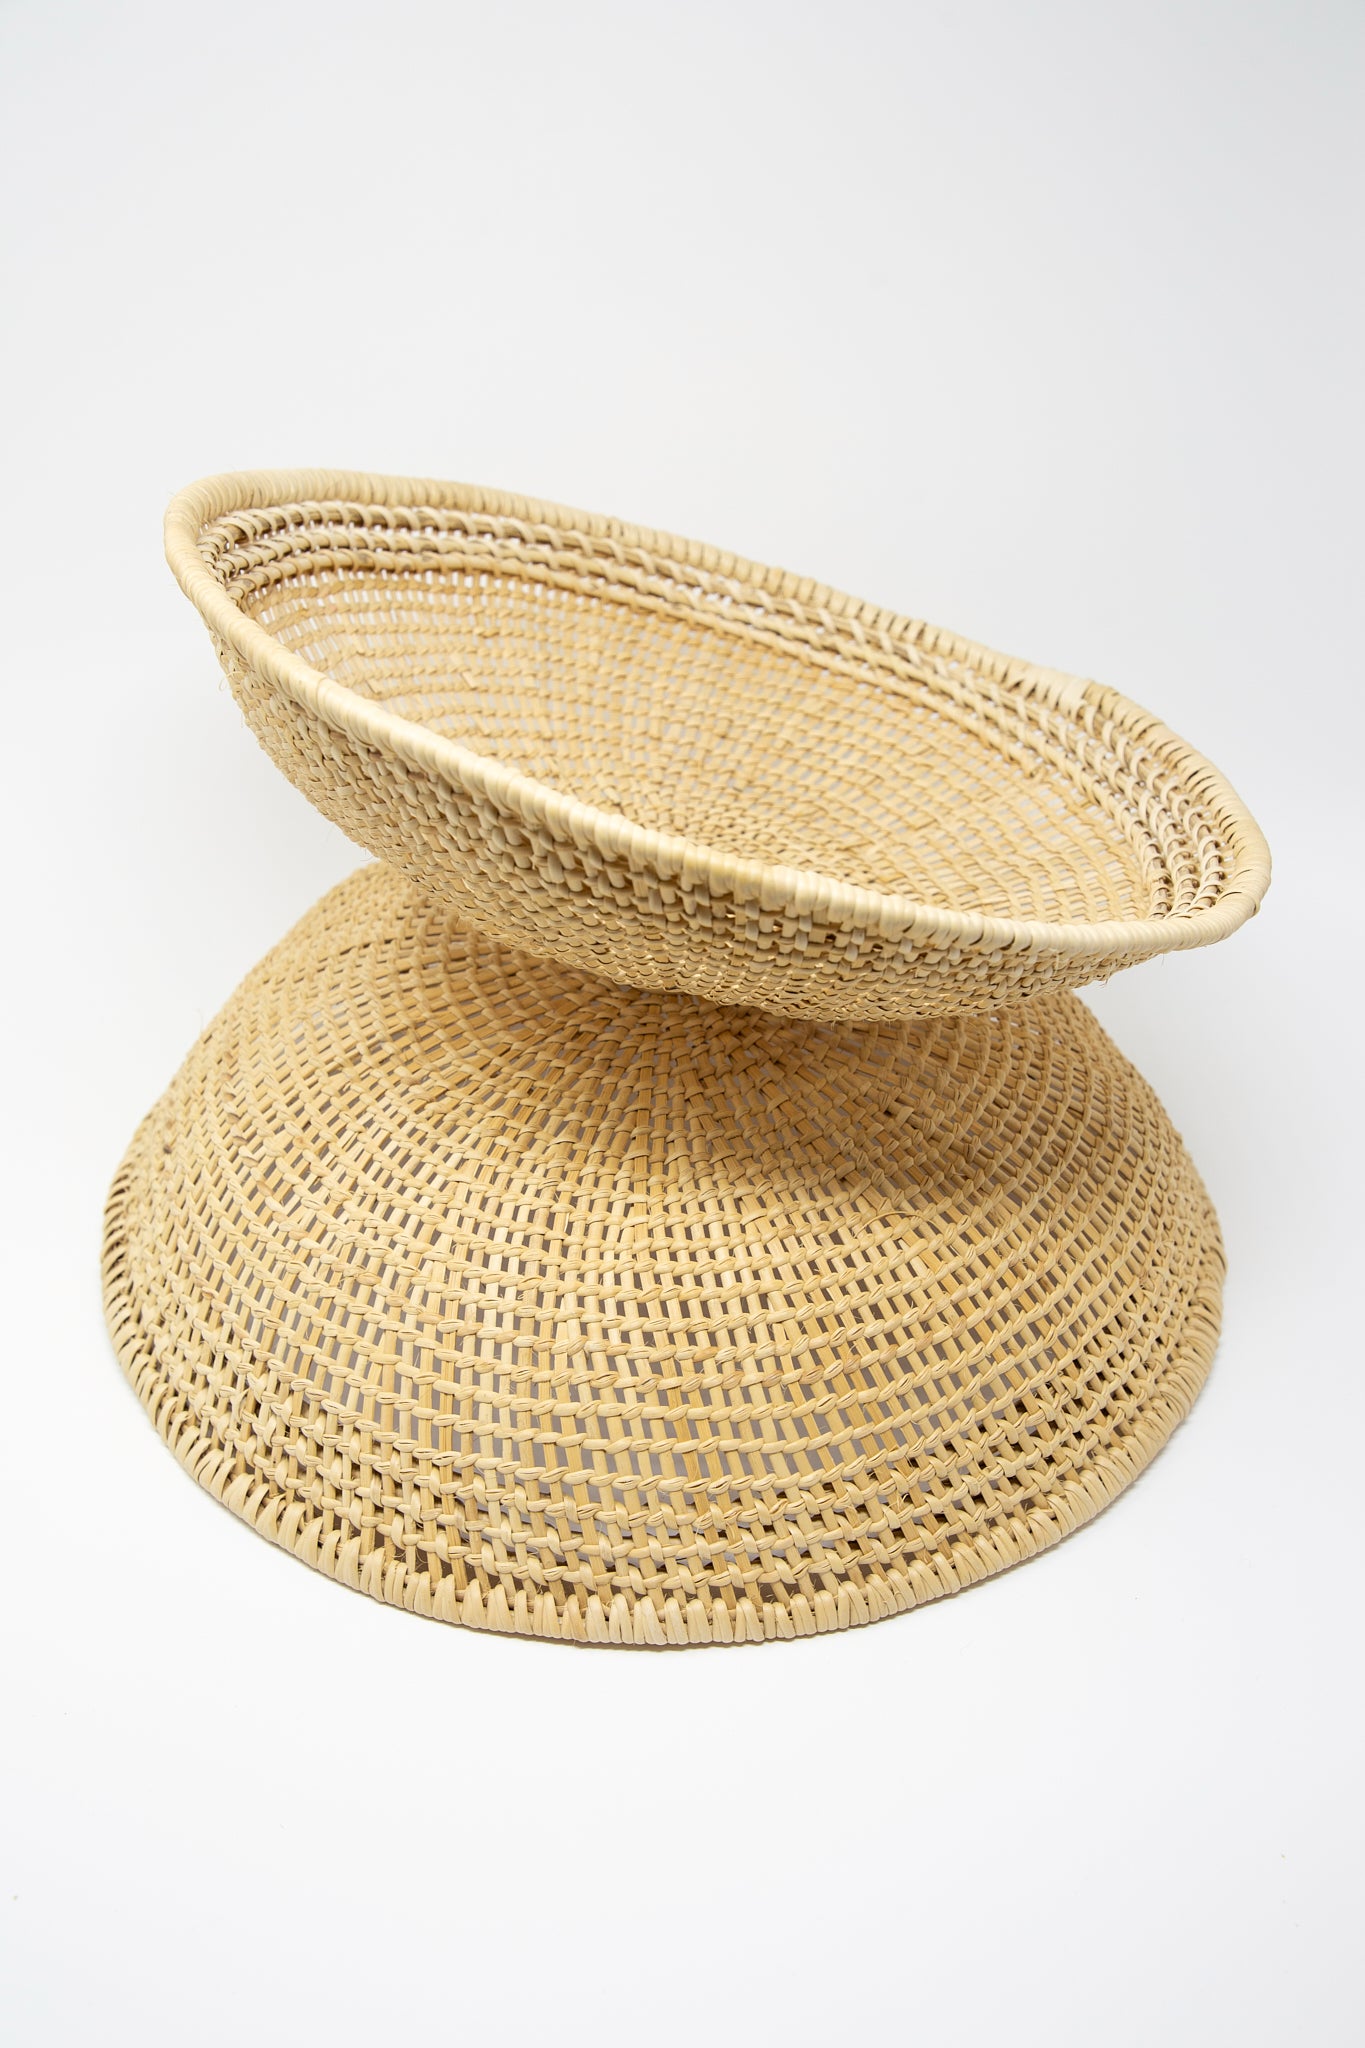 An artisan Plaza Bolivar Medium Avia Pova Basket, skillfully crafted using weaving techniques, placed on top of a clean white background.